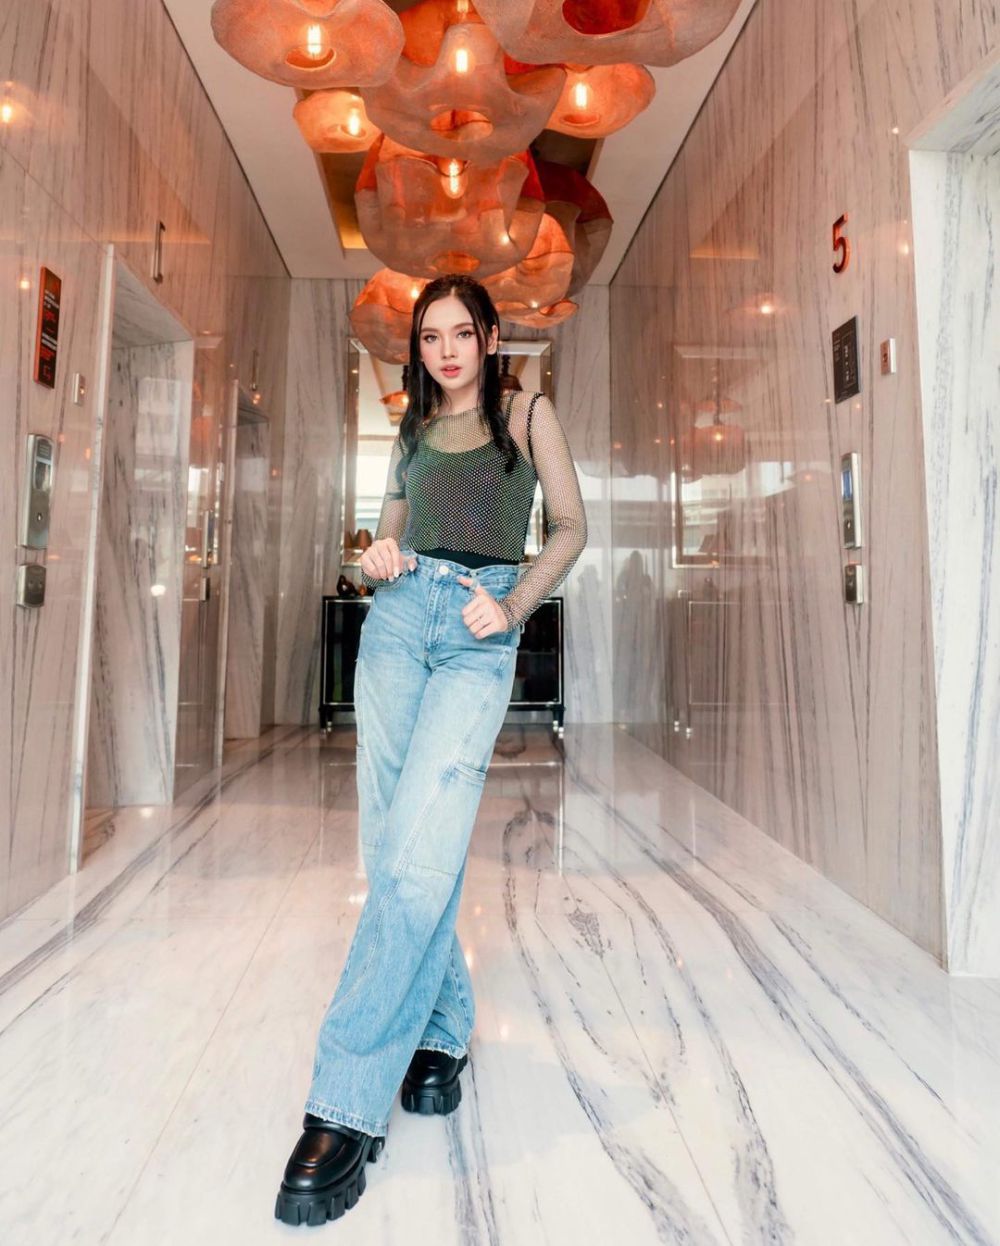 10 Ide Styling Nuansa Jeans ala Lyodra Ginting, Super Charming!